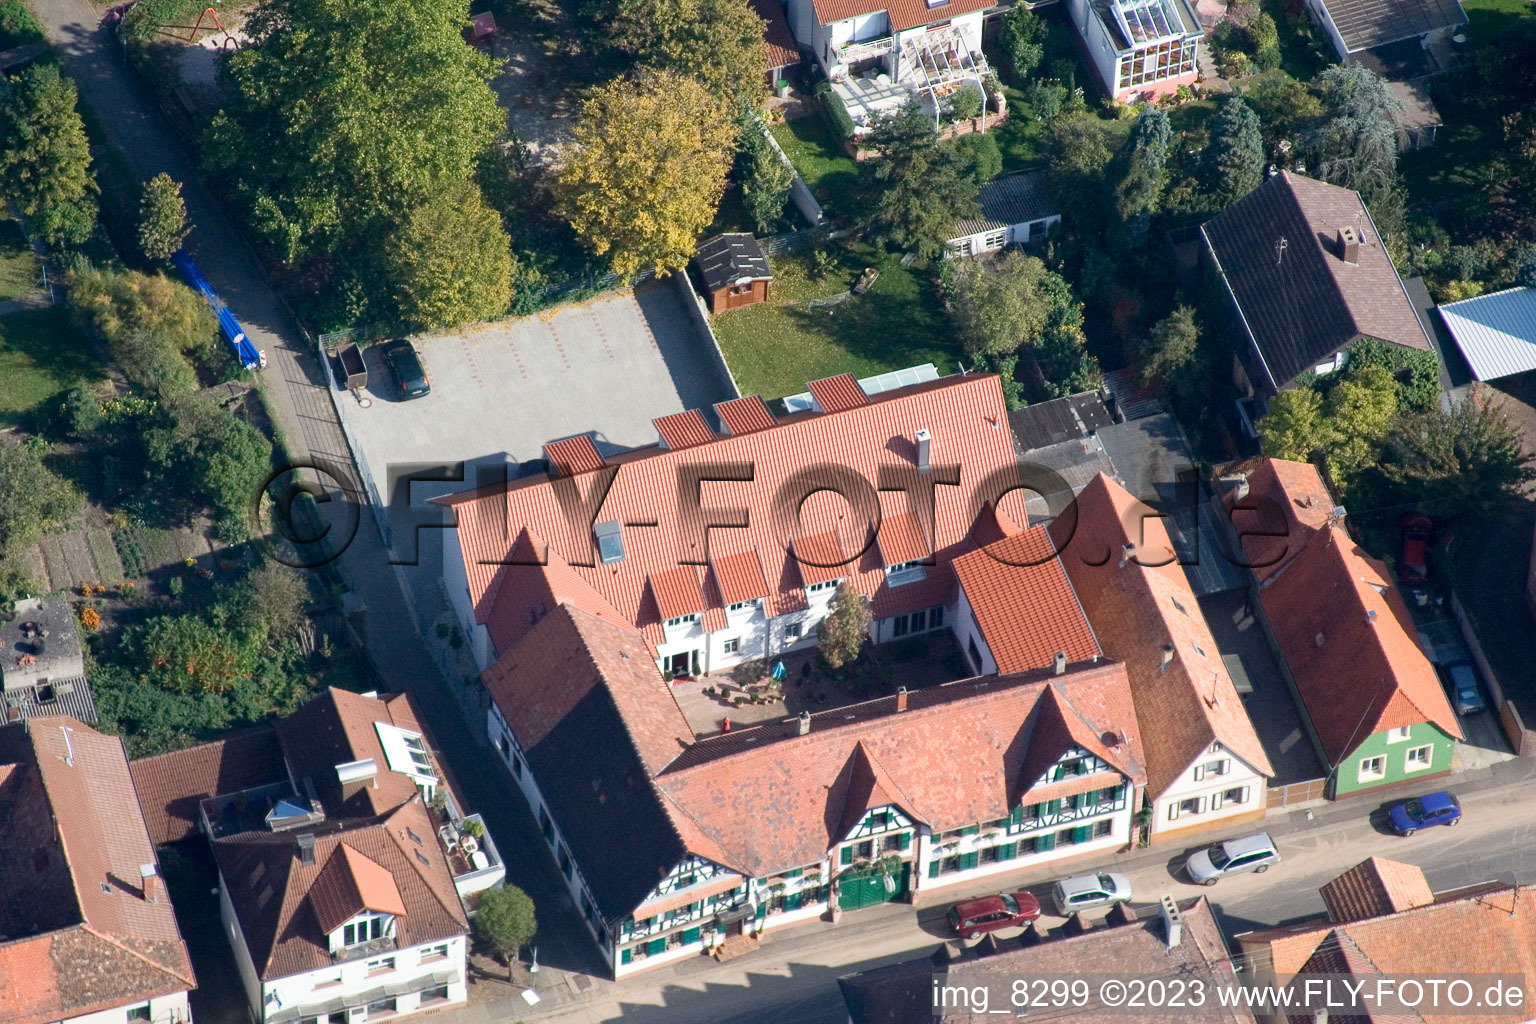 Bahnhofstr in Kandel in the state Rhineland-Palatinate, Germany from above